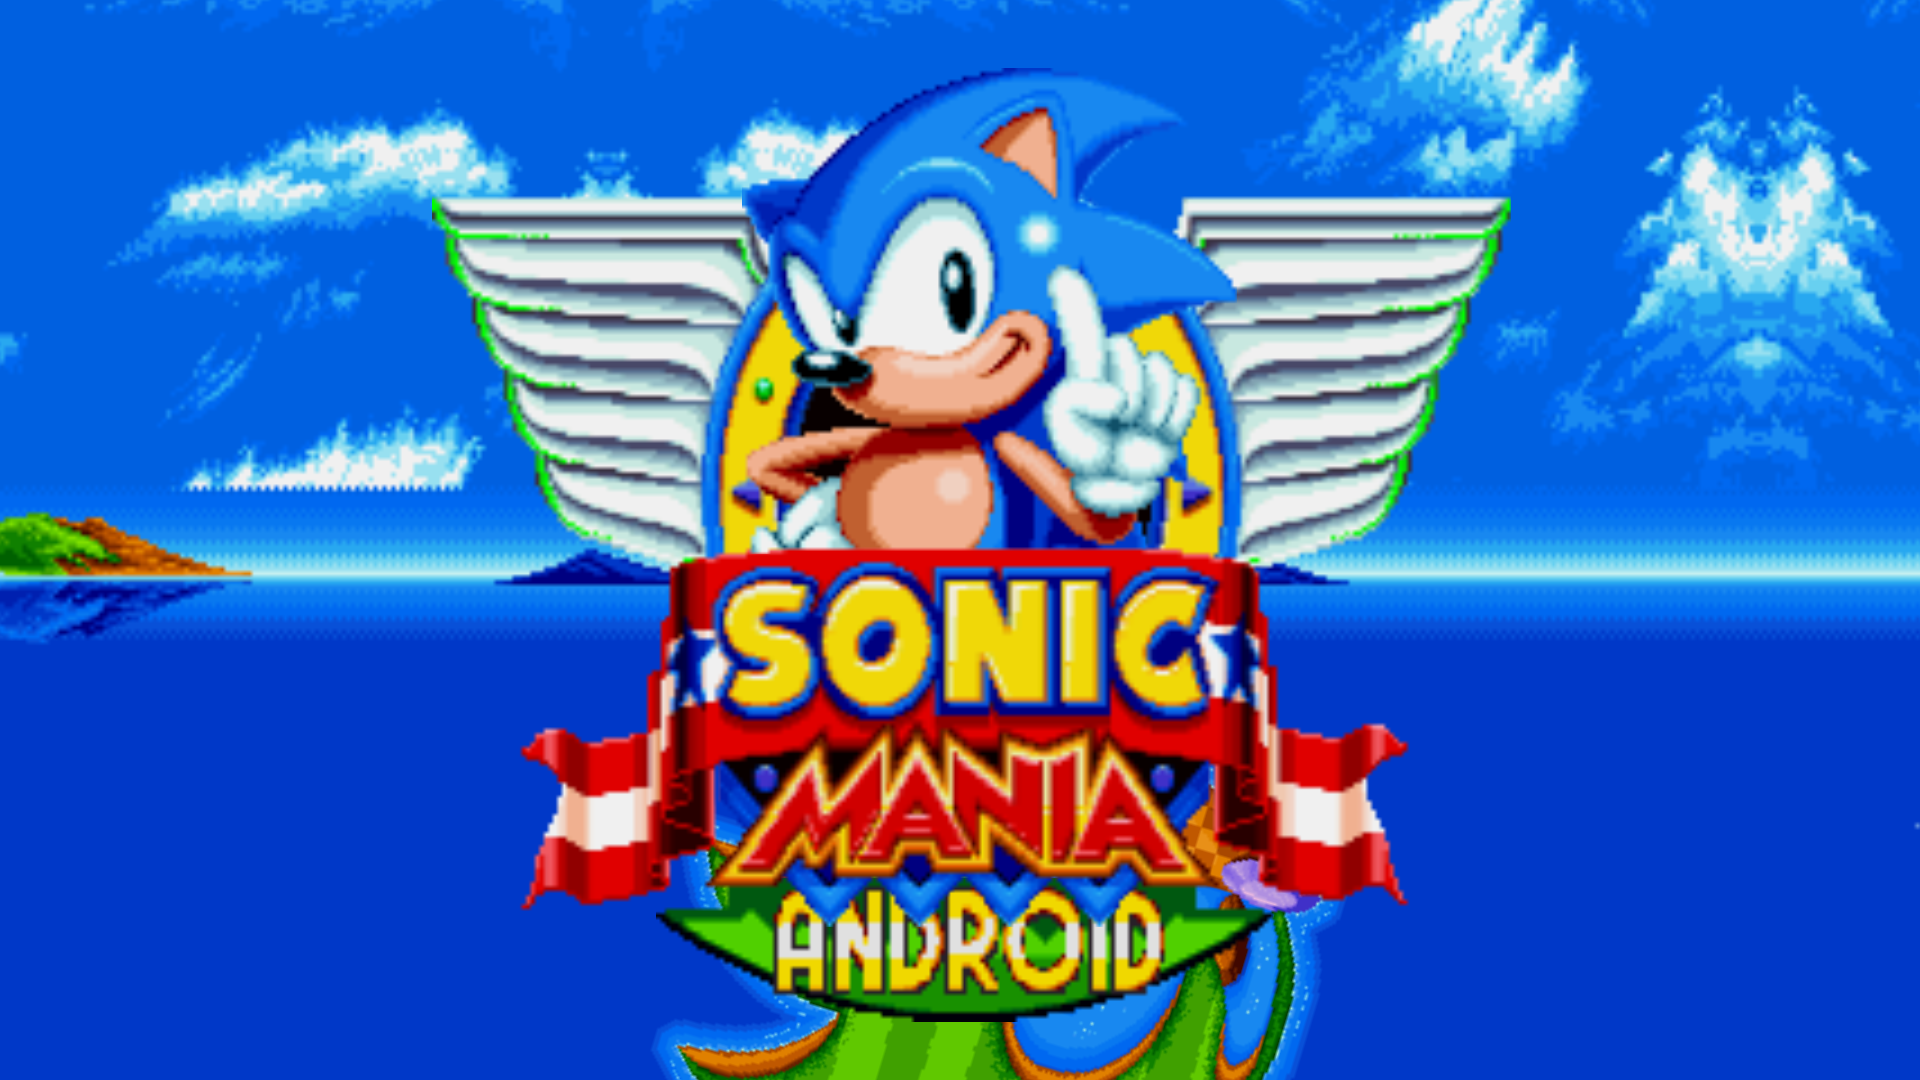 shield - Sonic Mania Android by Creeps097YT